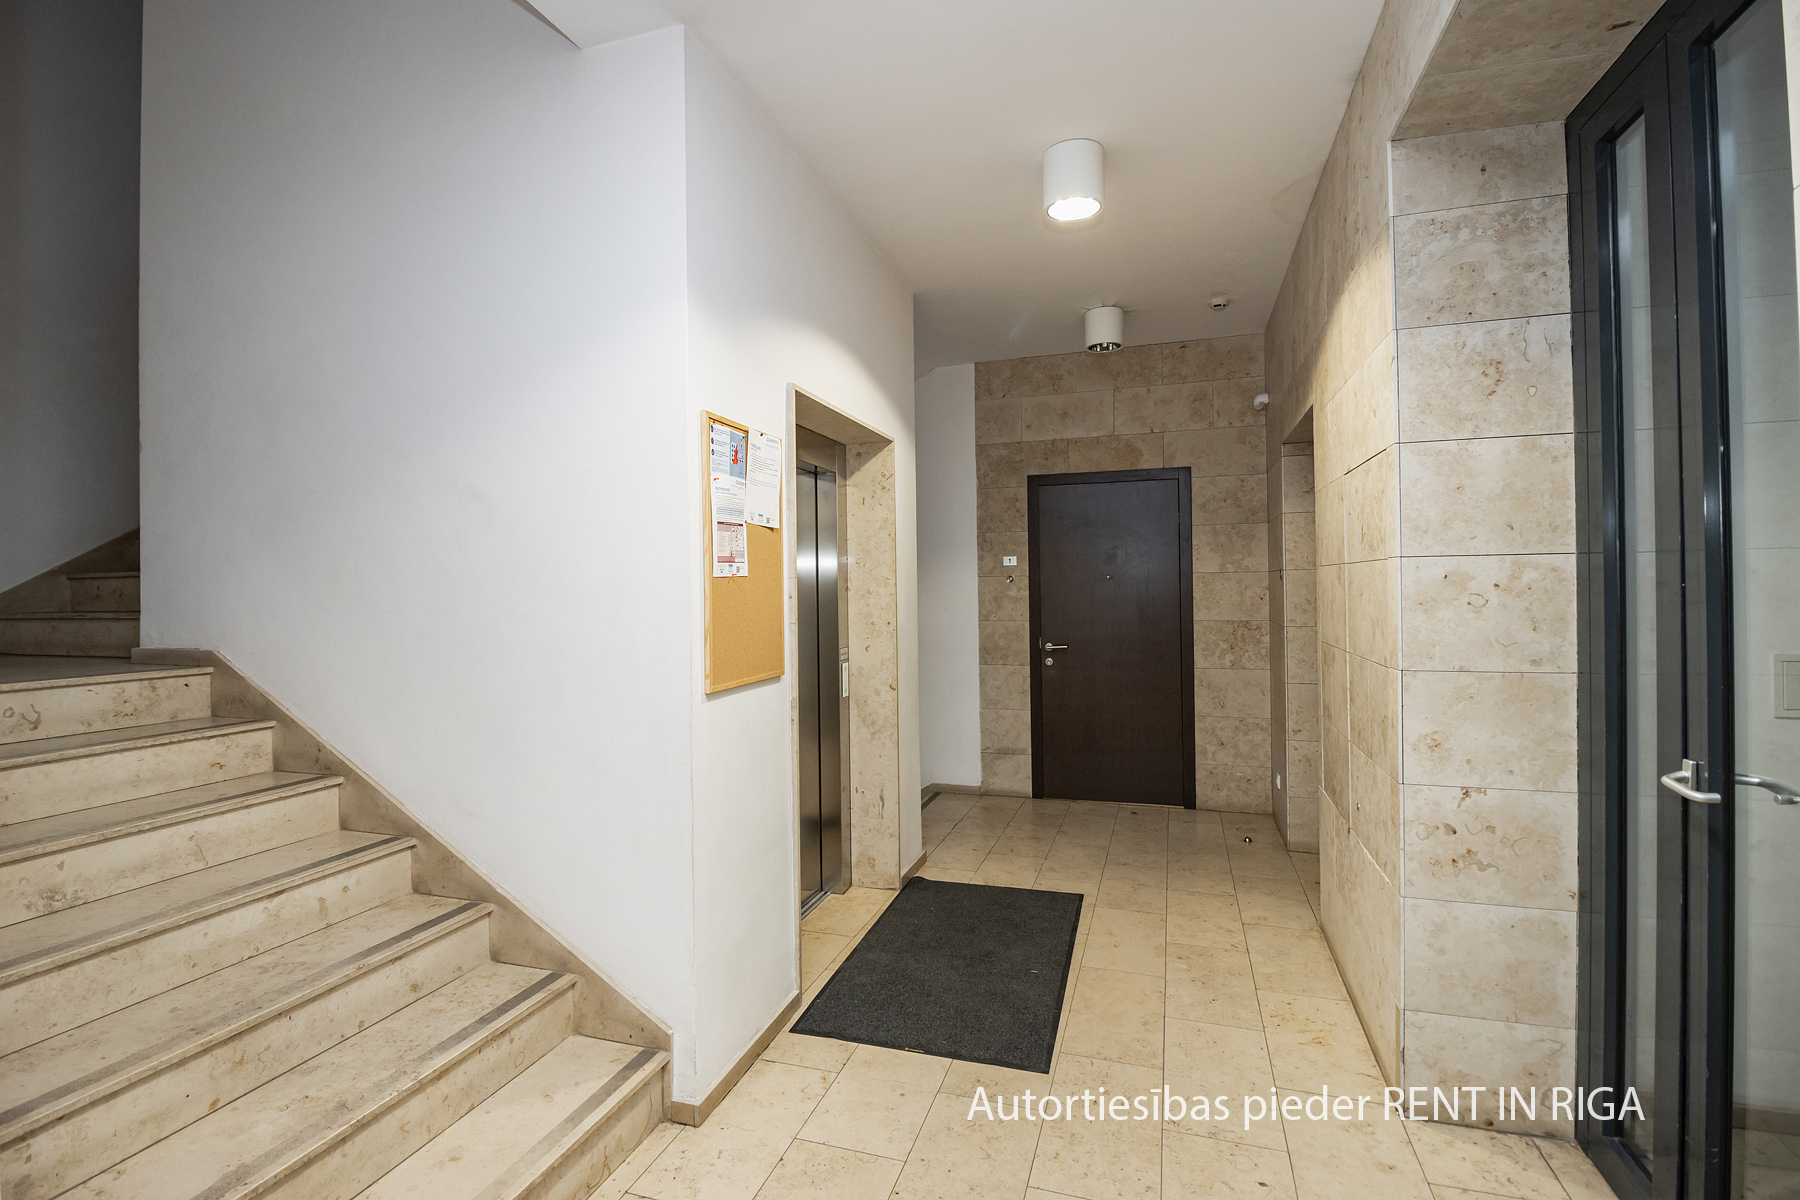 Apartment for rent, Liepājas street 2 - Image 1